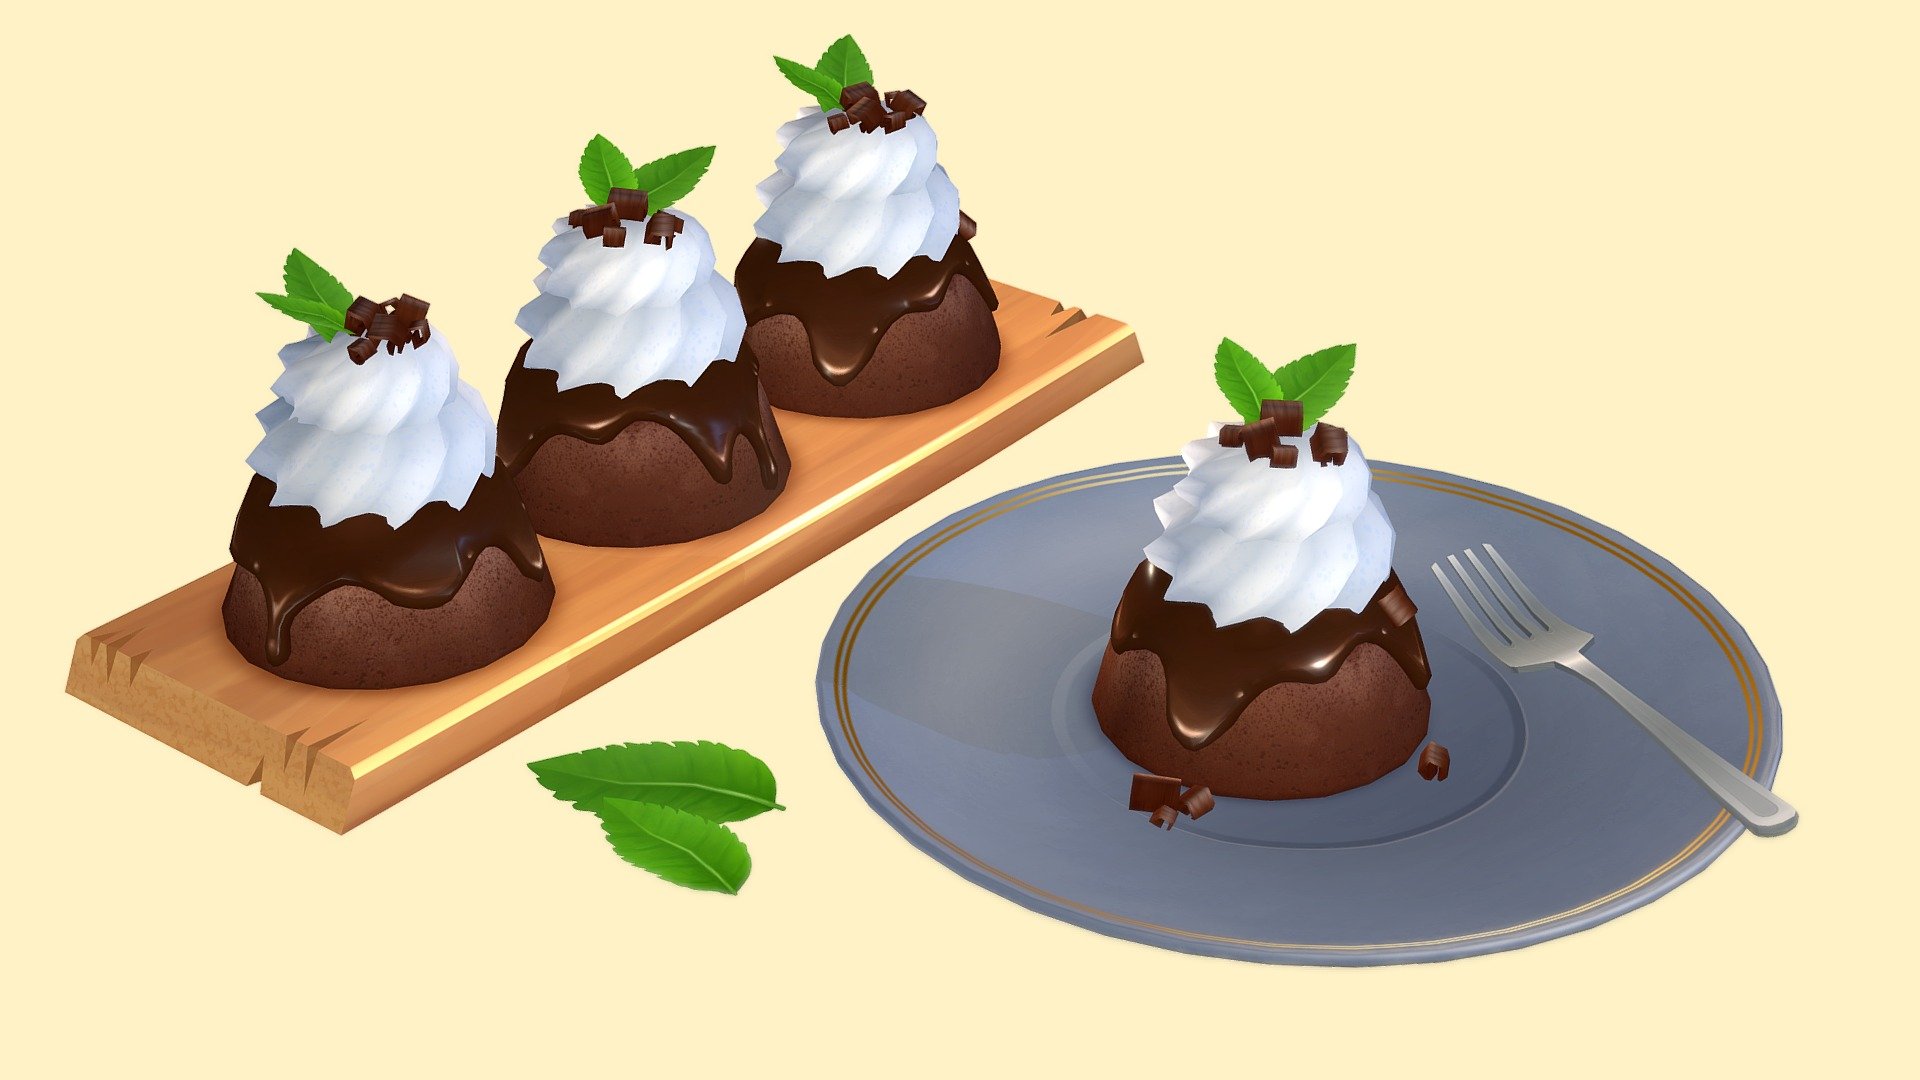 Hello! 
Here is my participation for the Dessert Challenge! 

I had so much fun working on it! 
Hope You enjoy! 

Ps: here my reference!
https://www.thekitchenmccabe.com/2014/10/21/mint-chocolate-mini-cakes/
I used Maya and photoshop! - Delicious Chocolate Mint Cake - 3D model by lamunger 3d model